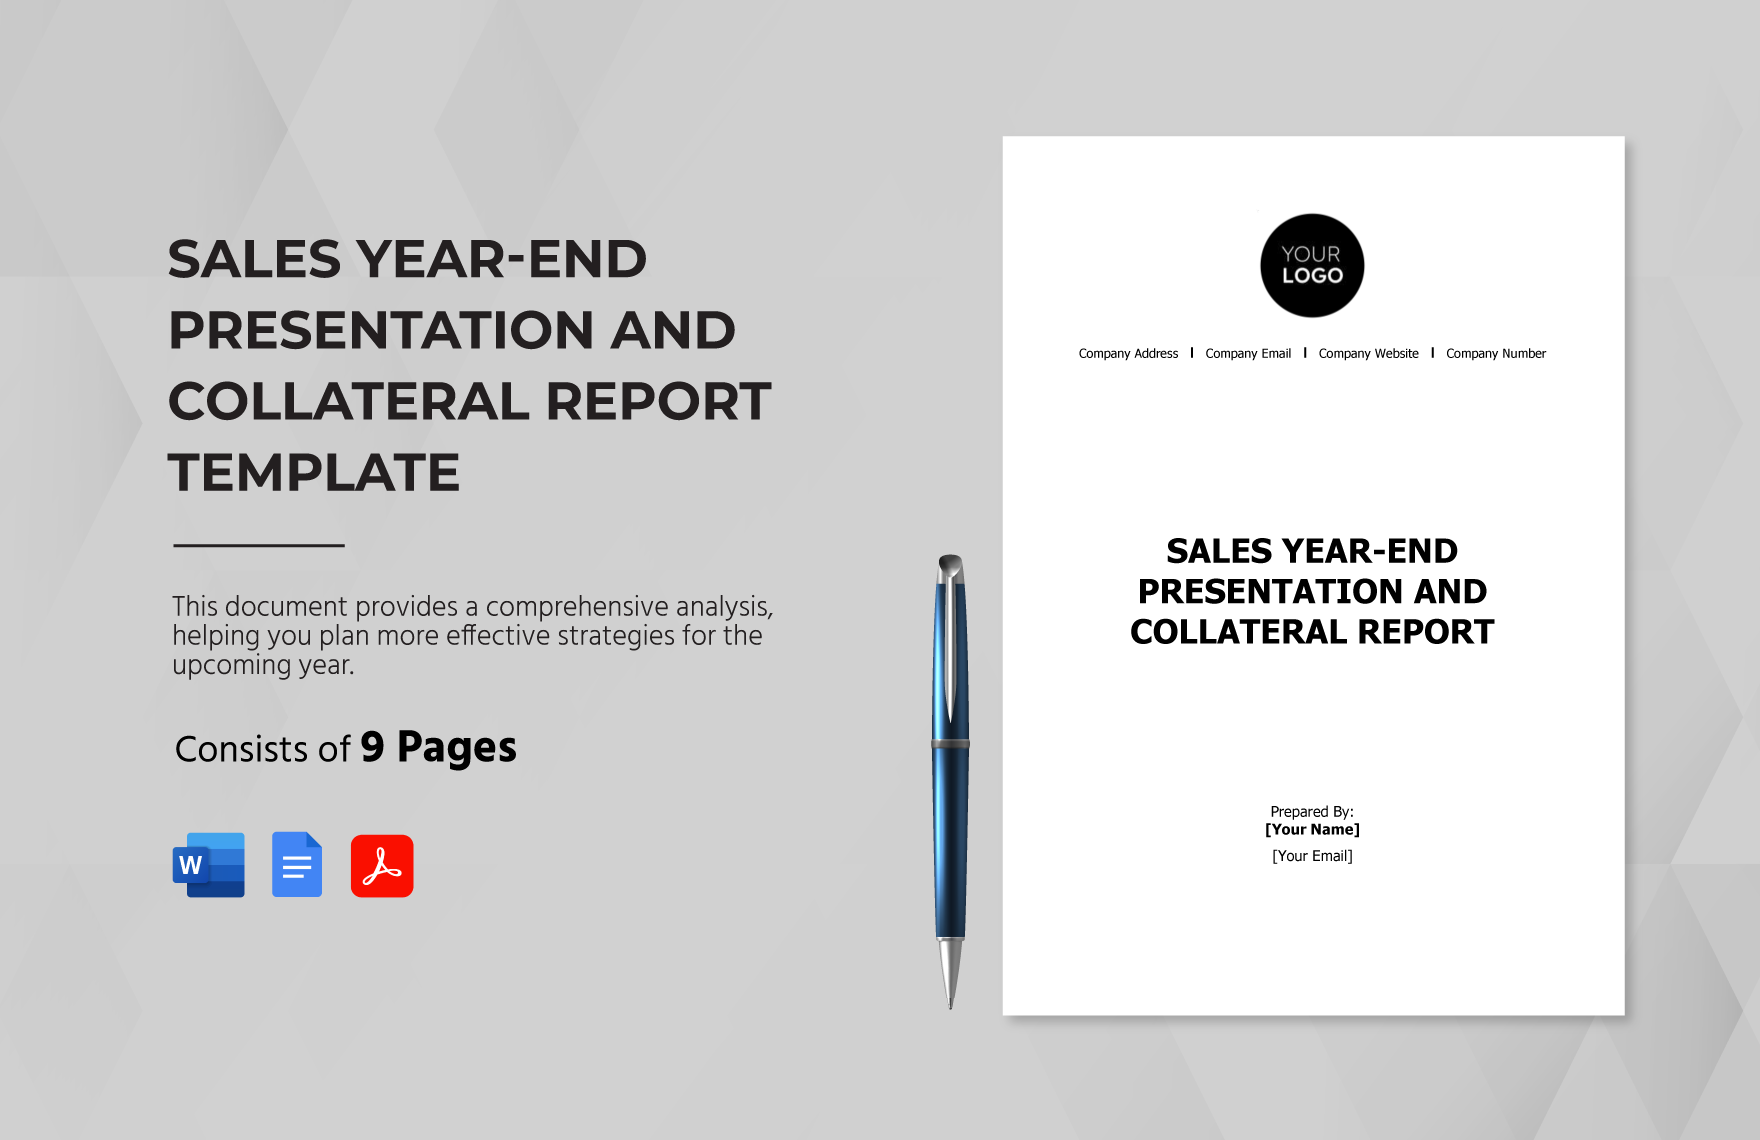 Sales Year-end Presentation and Collateral Report Template